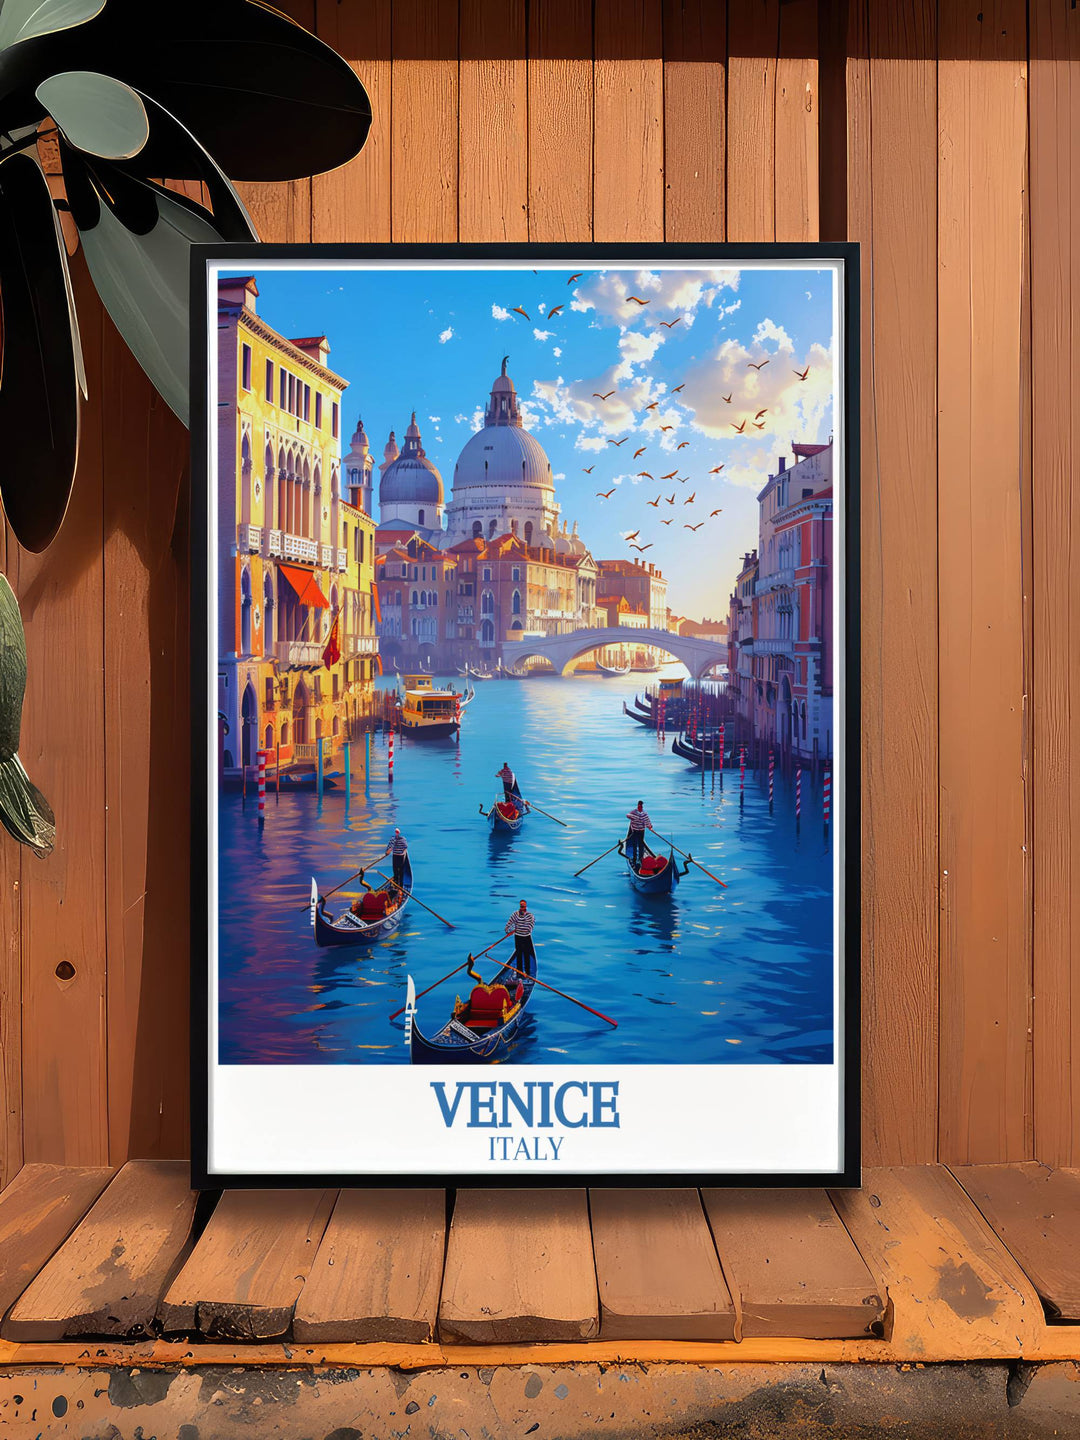 Italy custom print featuring the Grand Canal, with detailed illustrations of the gondolas and palaces that define Venices unique landscape, capturing the citys cultural heritage and architectural splendor in a stunning piece of art.